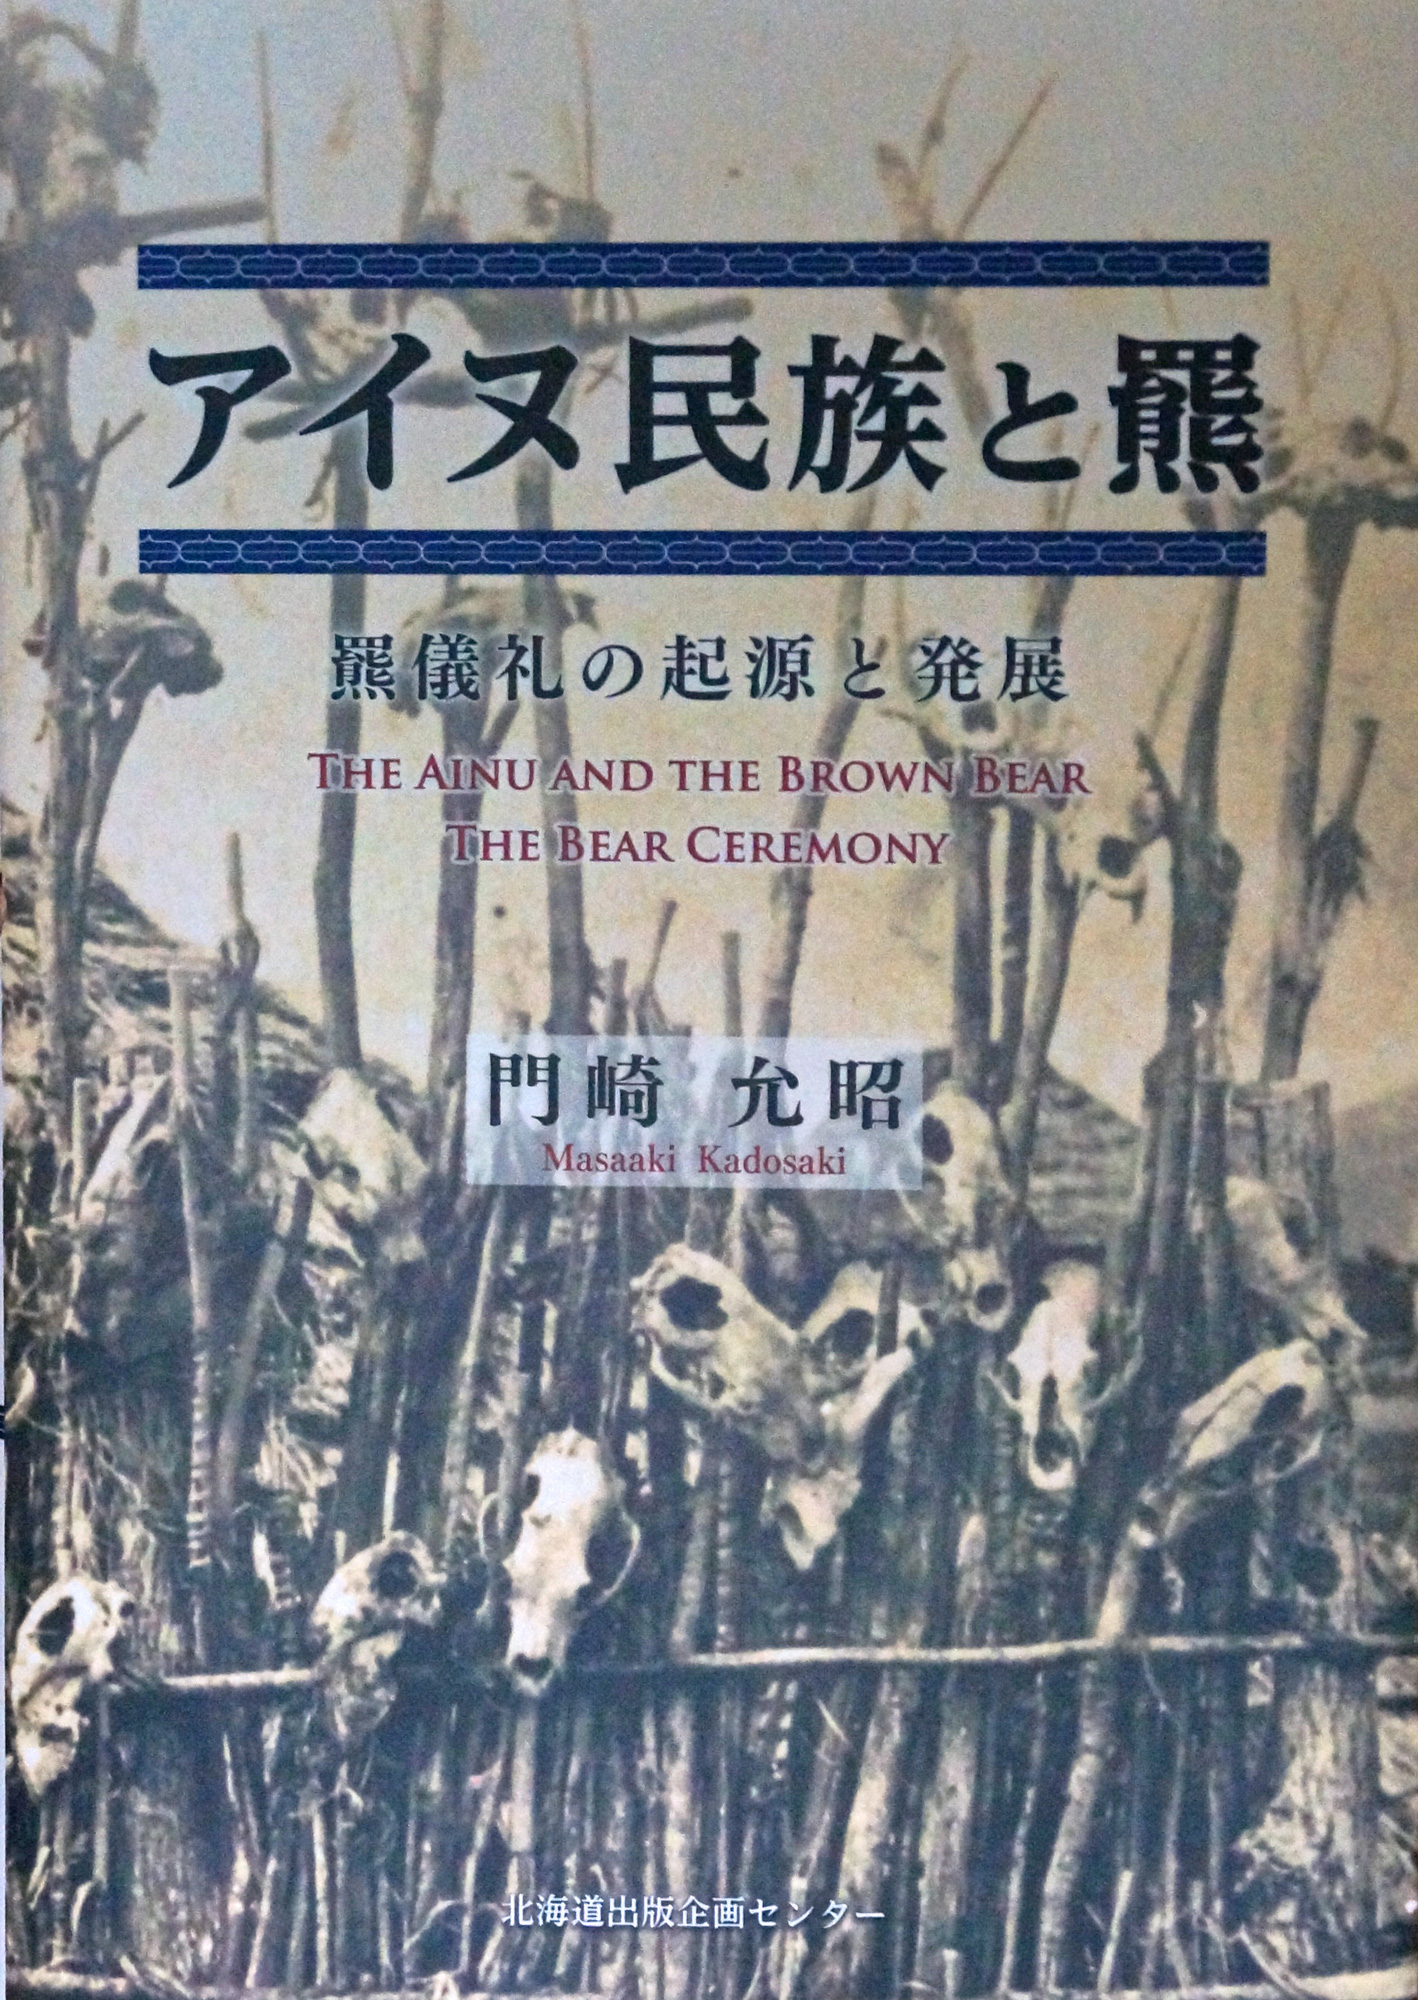 Ainu people and Brown Bear - the development of Ritual and ceremony for brown bear written by Dr. Masaaki Kadosaki